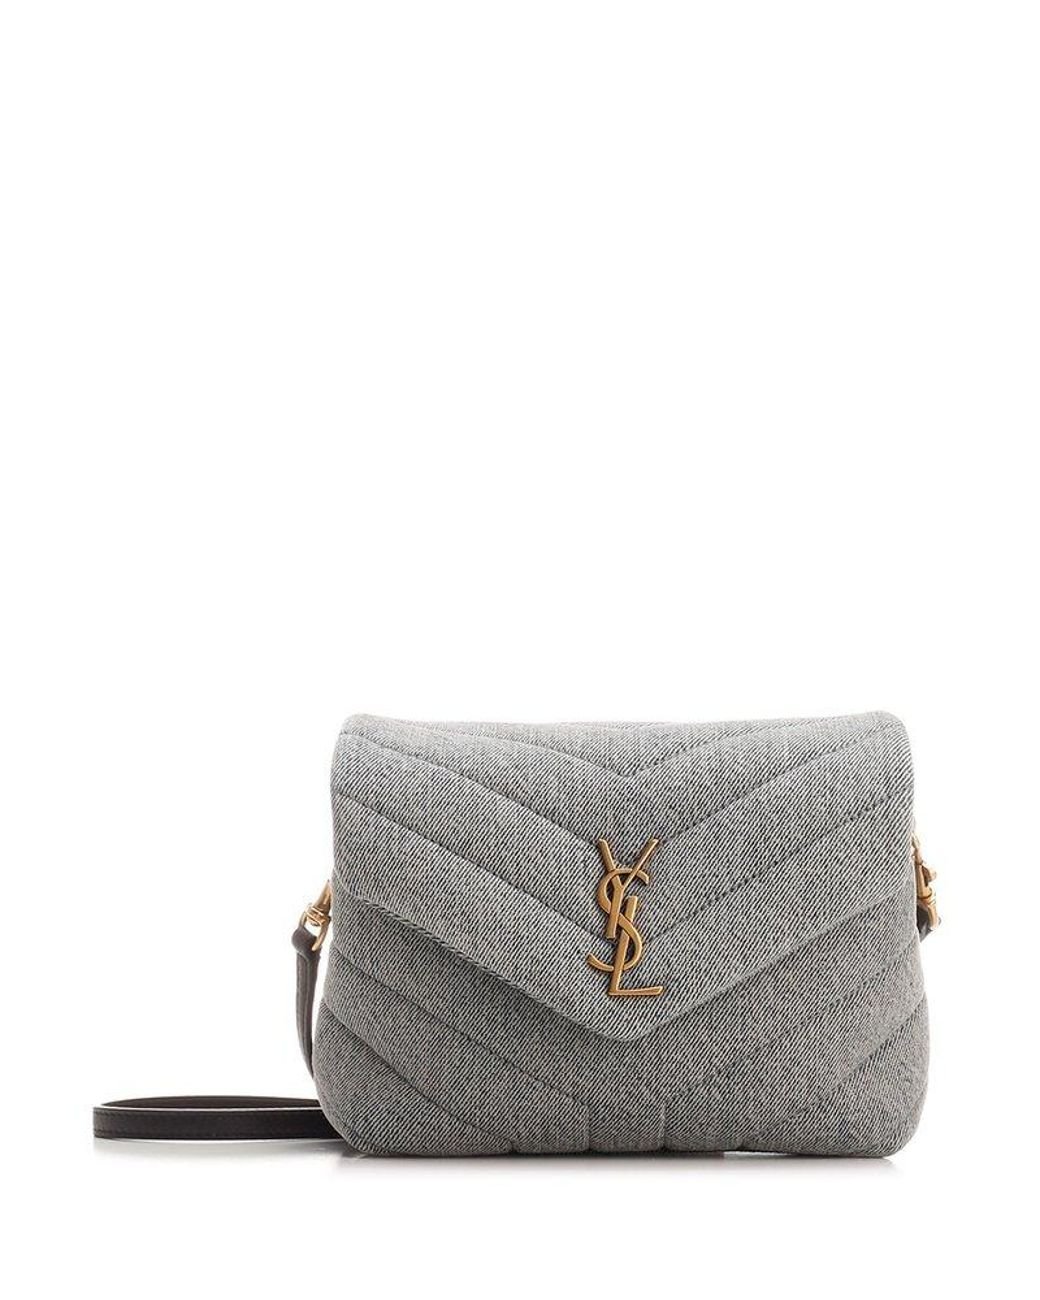 Boujee On A Budget: YSL 'Monogram' Crossbody Bag Review- DHGATE 